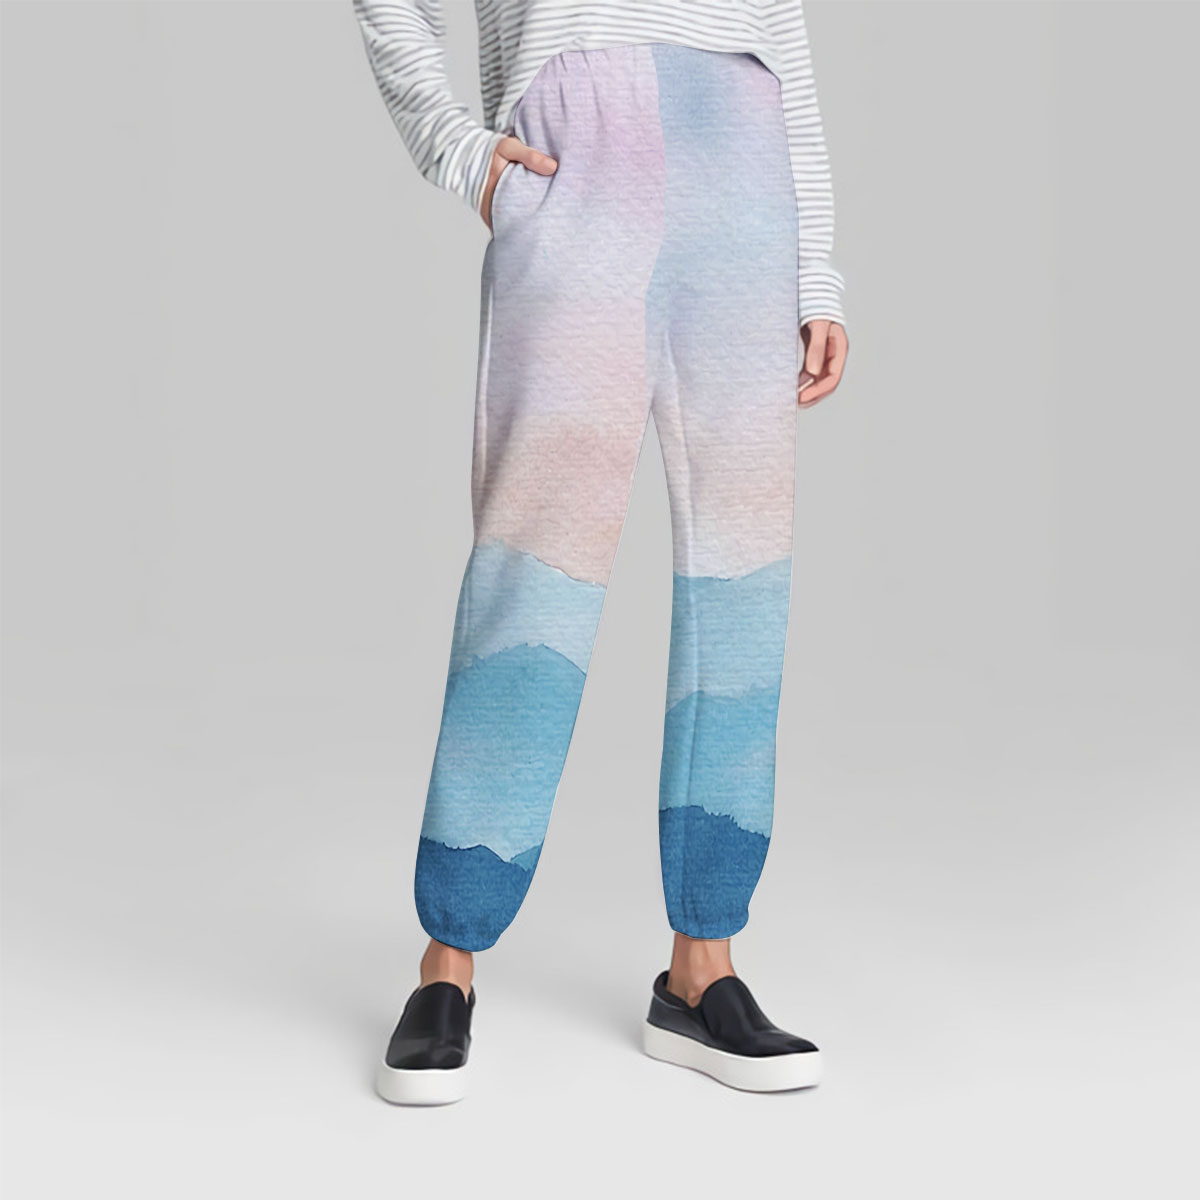 Abstract Mountain Sweatpant